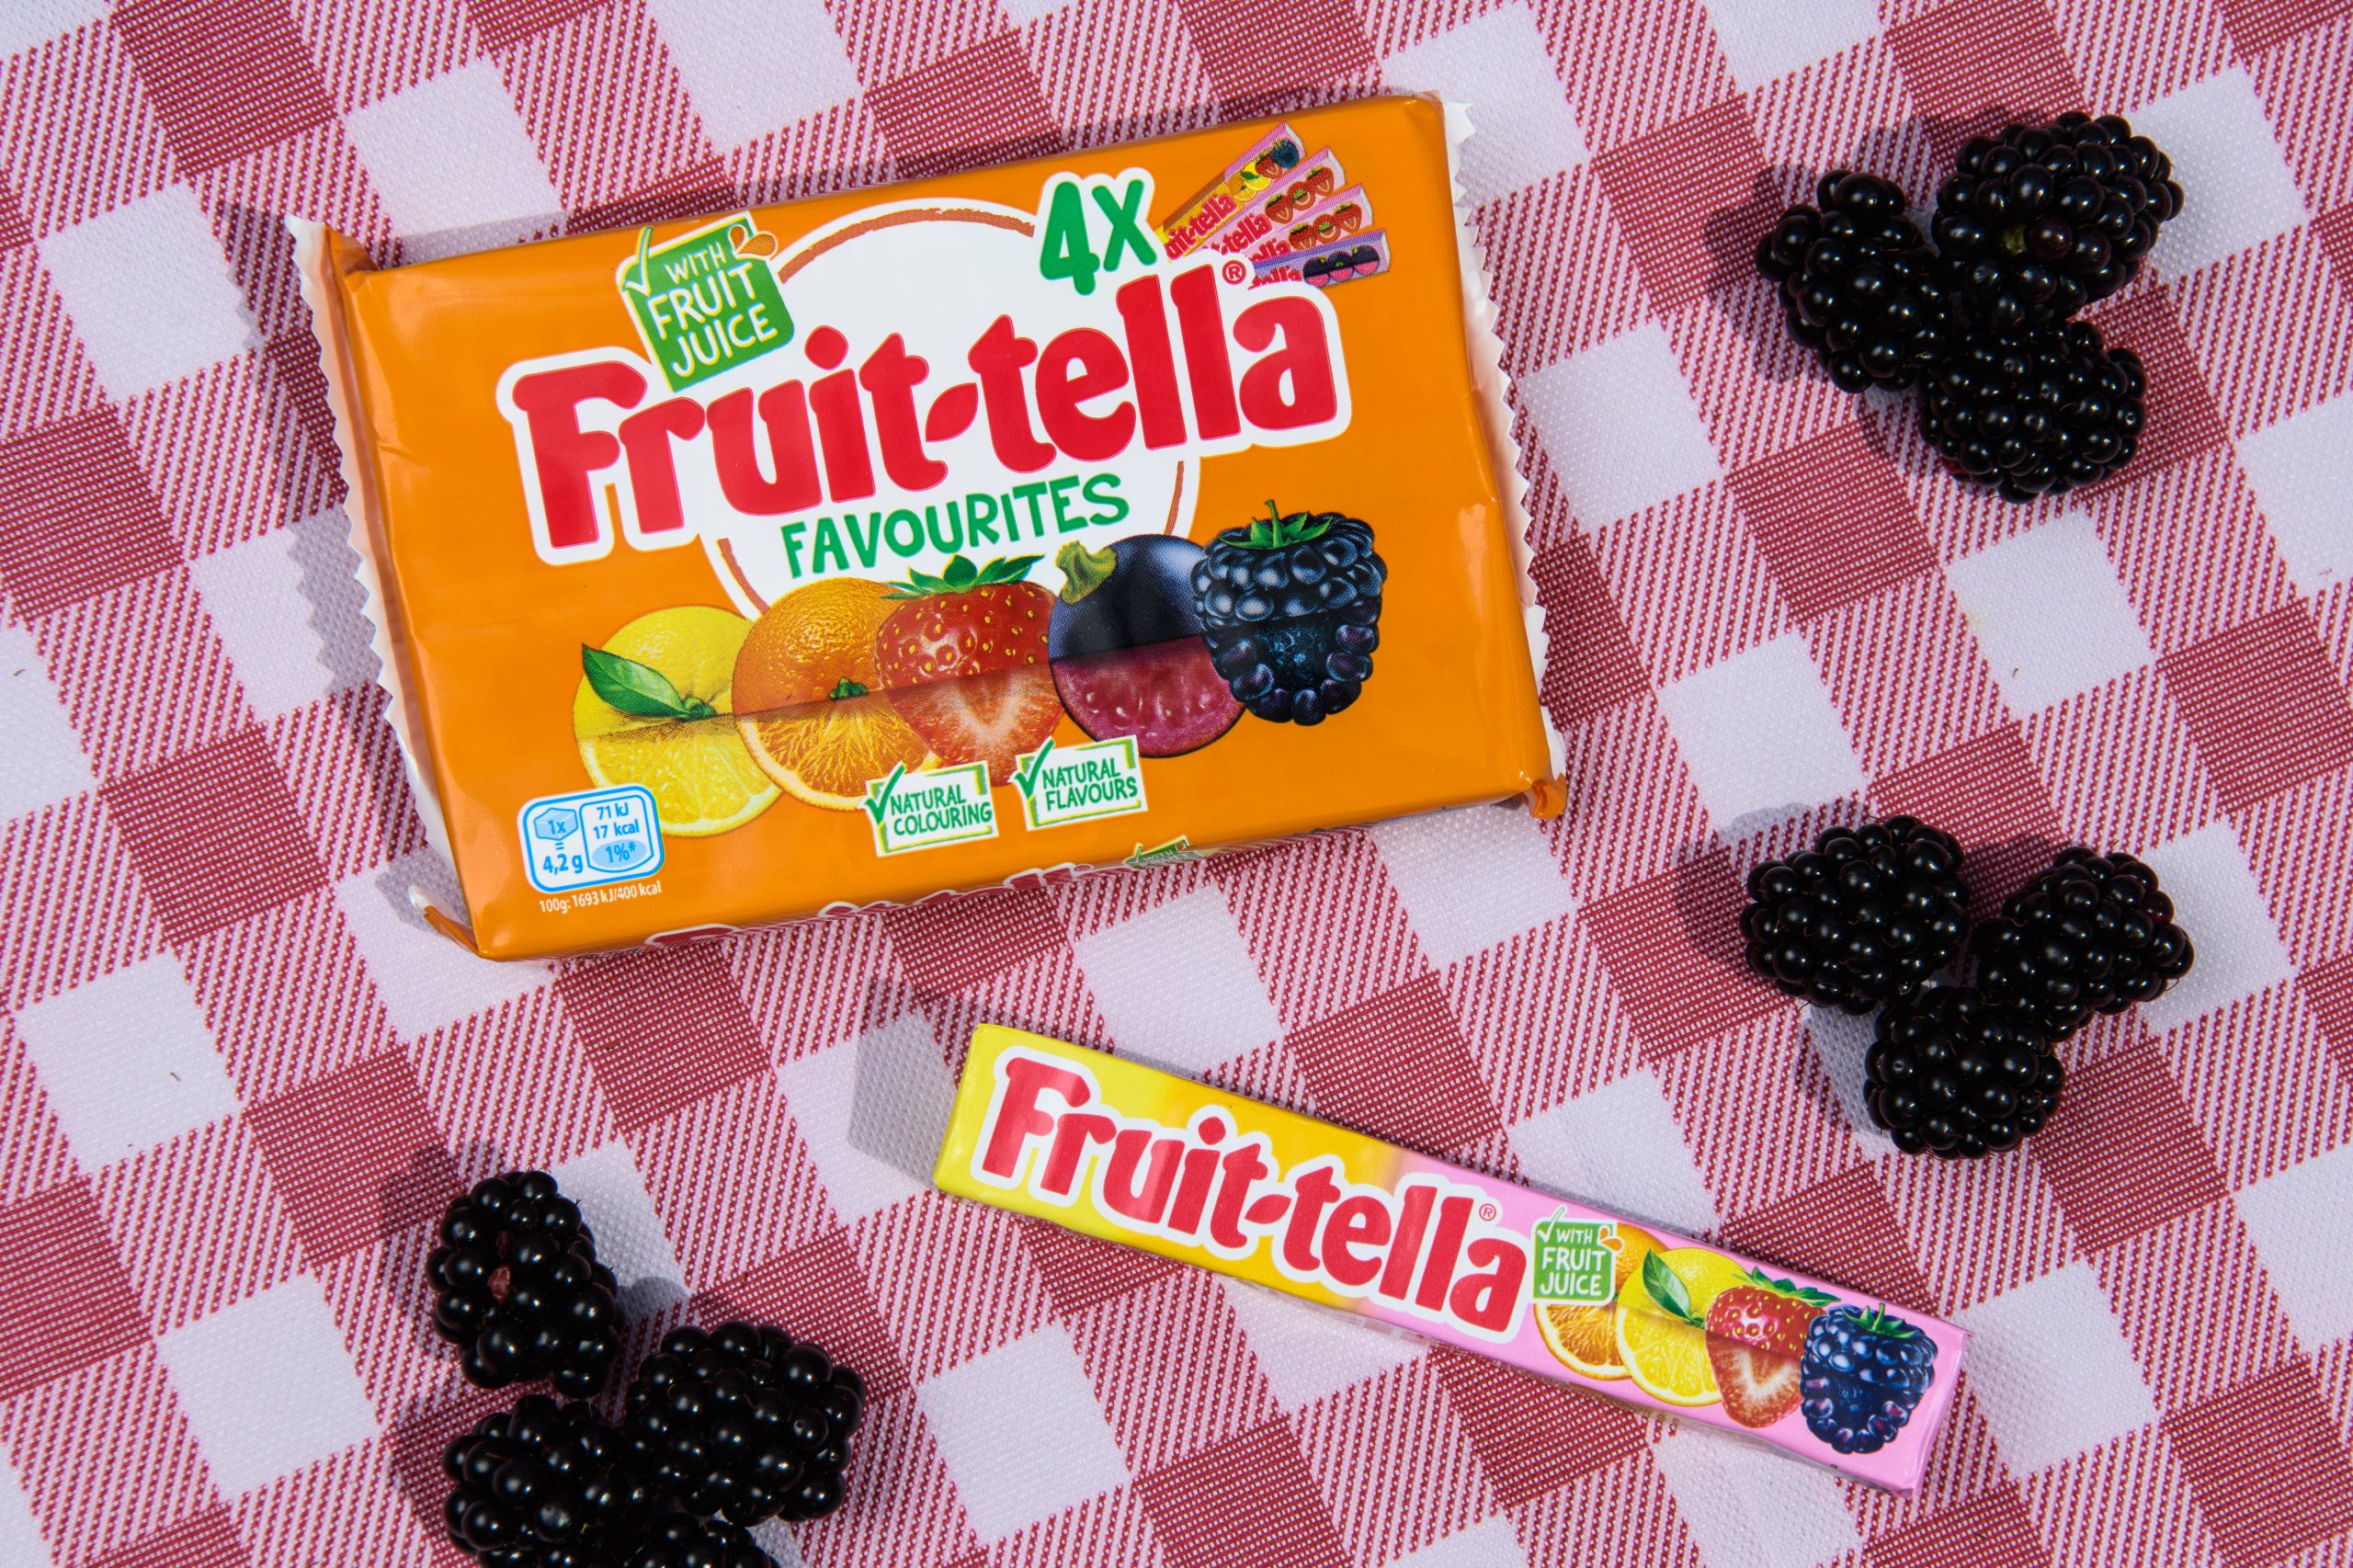 Fruittella Summer Fruits now bursting with extra flavour